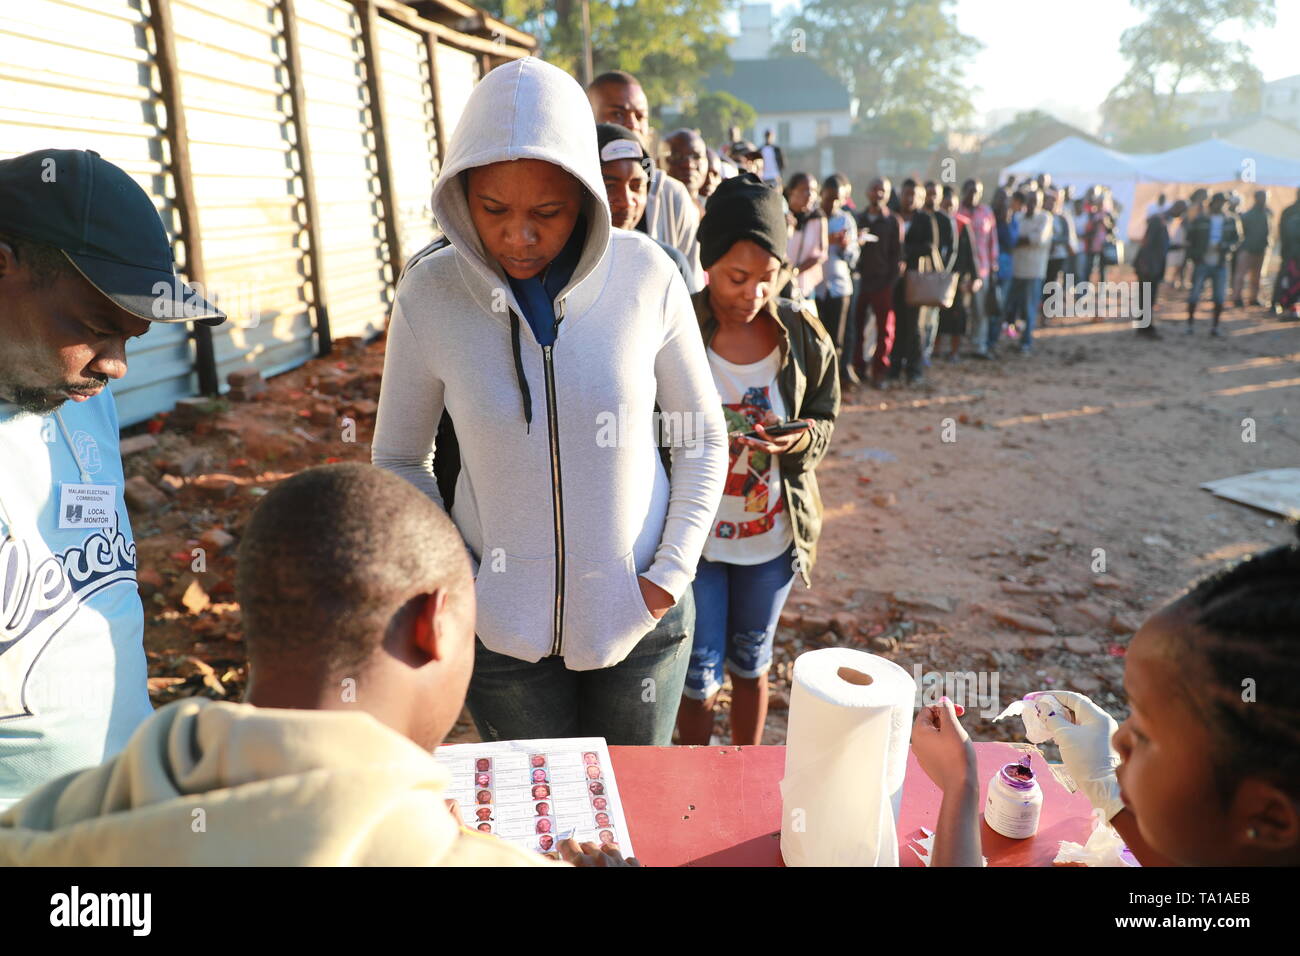 Blantyre, Malawi. 21st May, 2019. Voters queue to have their identities checked at a polling station in Blantyre, Malawi, May 21, 2019. Malawians across the country on Tuesday queued up to cast ballots that will determine which party is to rule the country in the next five years. Credit: Peng Lijun/Xinhua/Alamy Live News Stock Photo